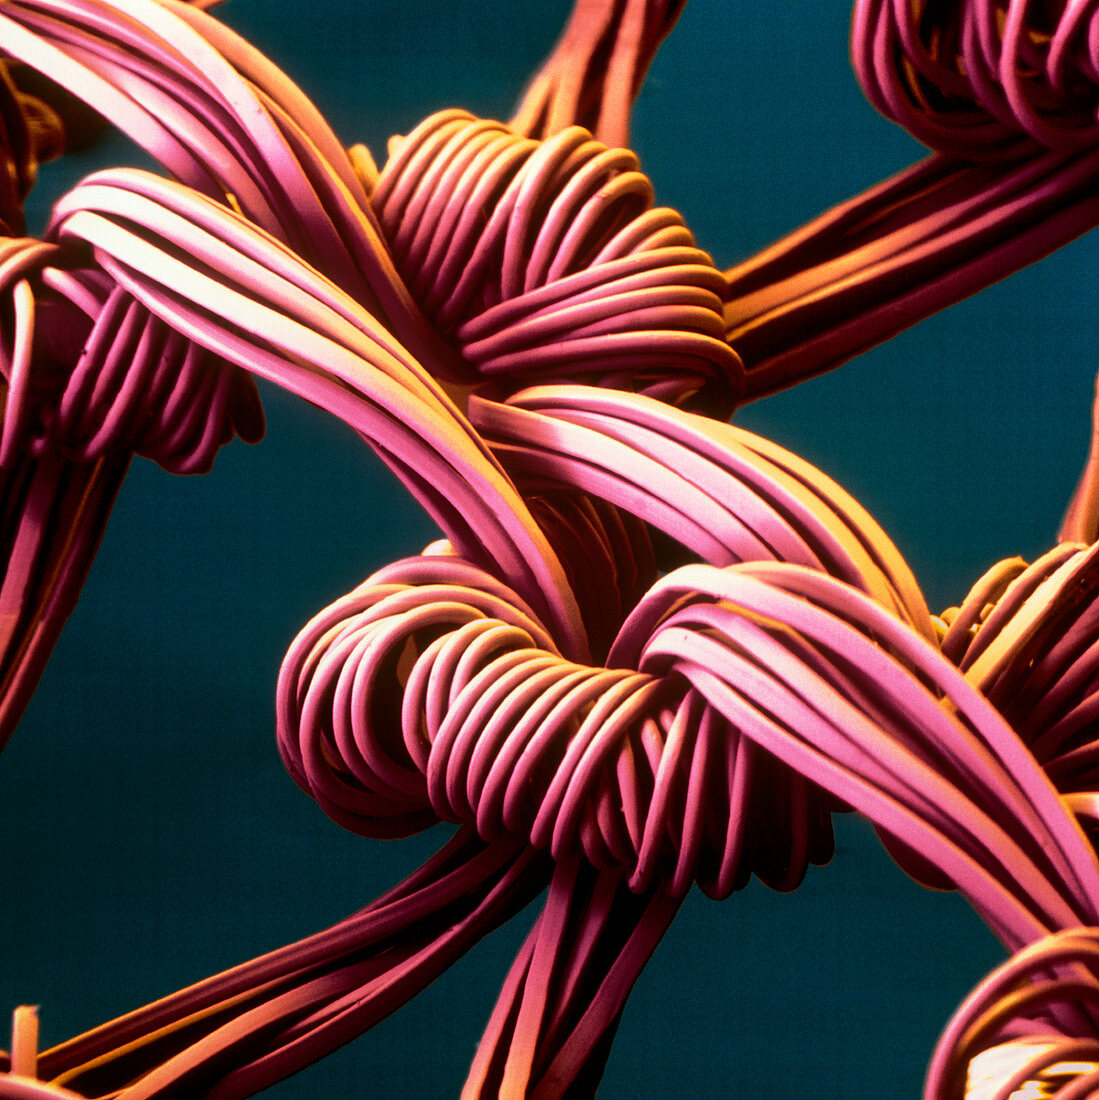 Coloured SEM of the weave of a nylon stocking